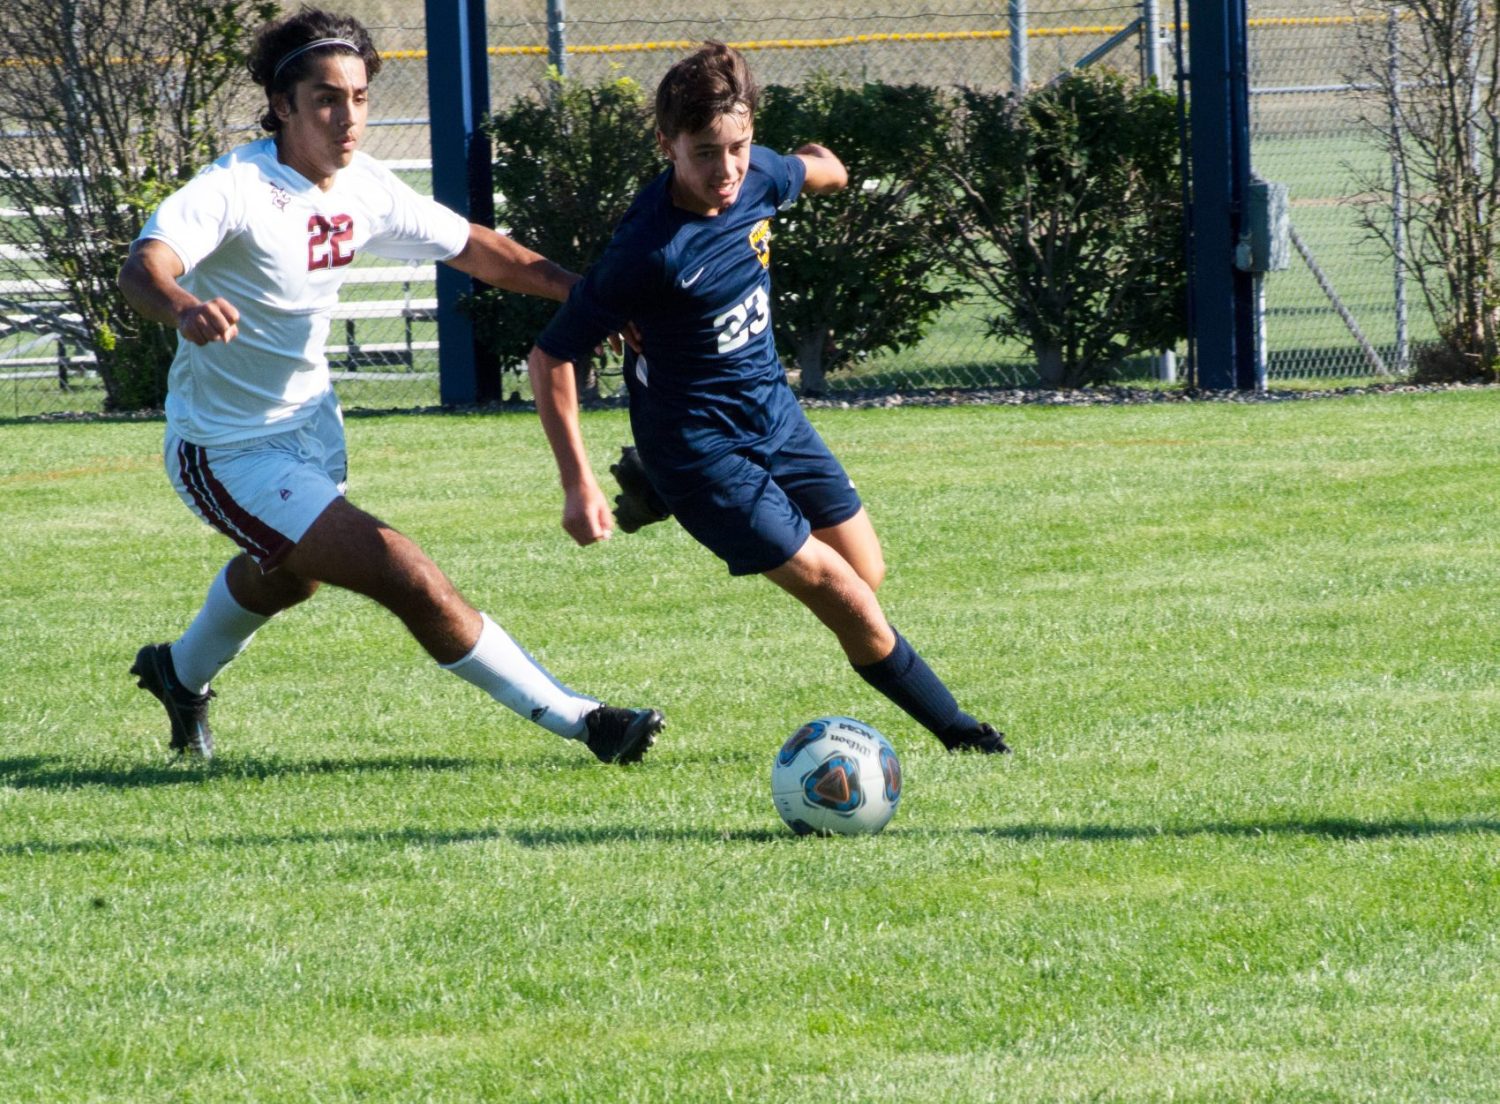 Manistee comes up short in 1-0 season-opening loss to Traverse City St. Francis